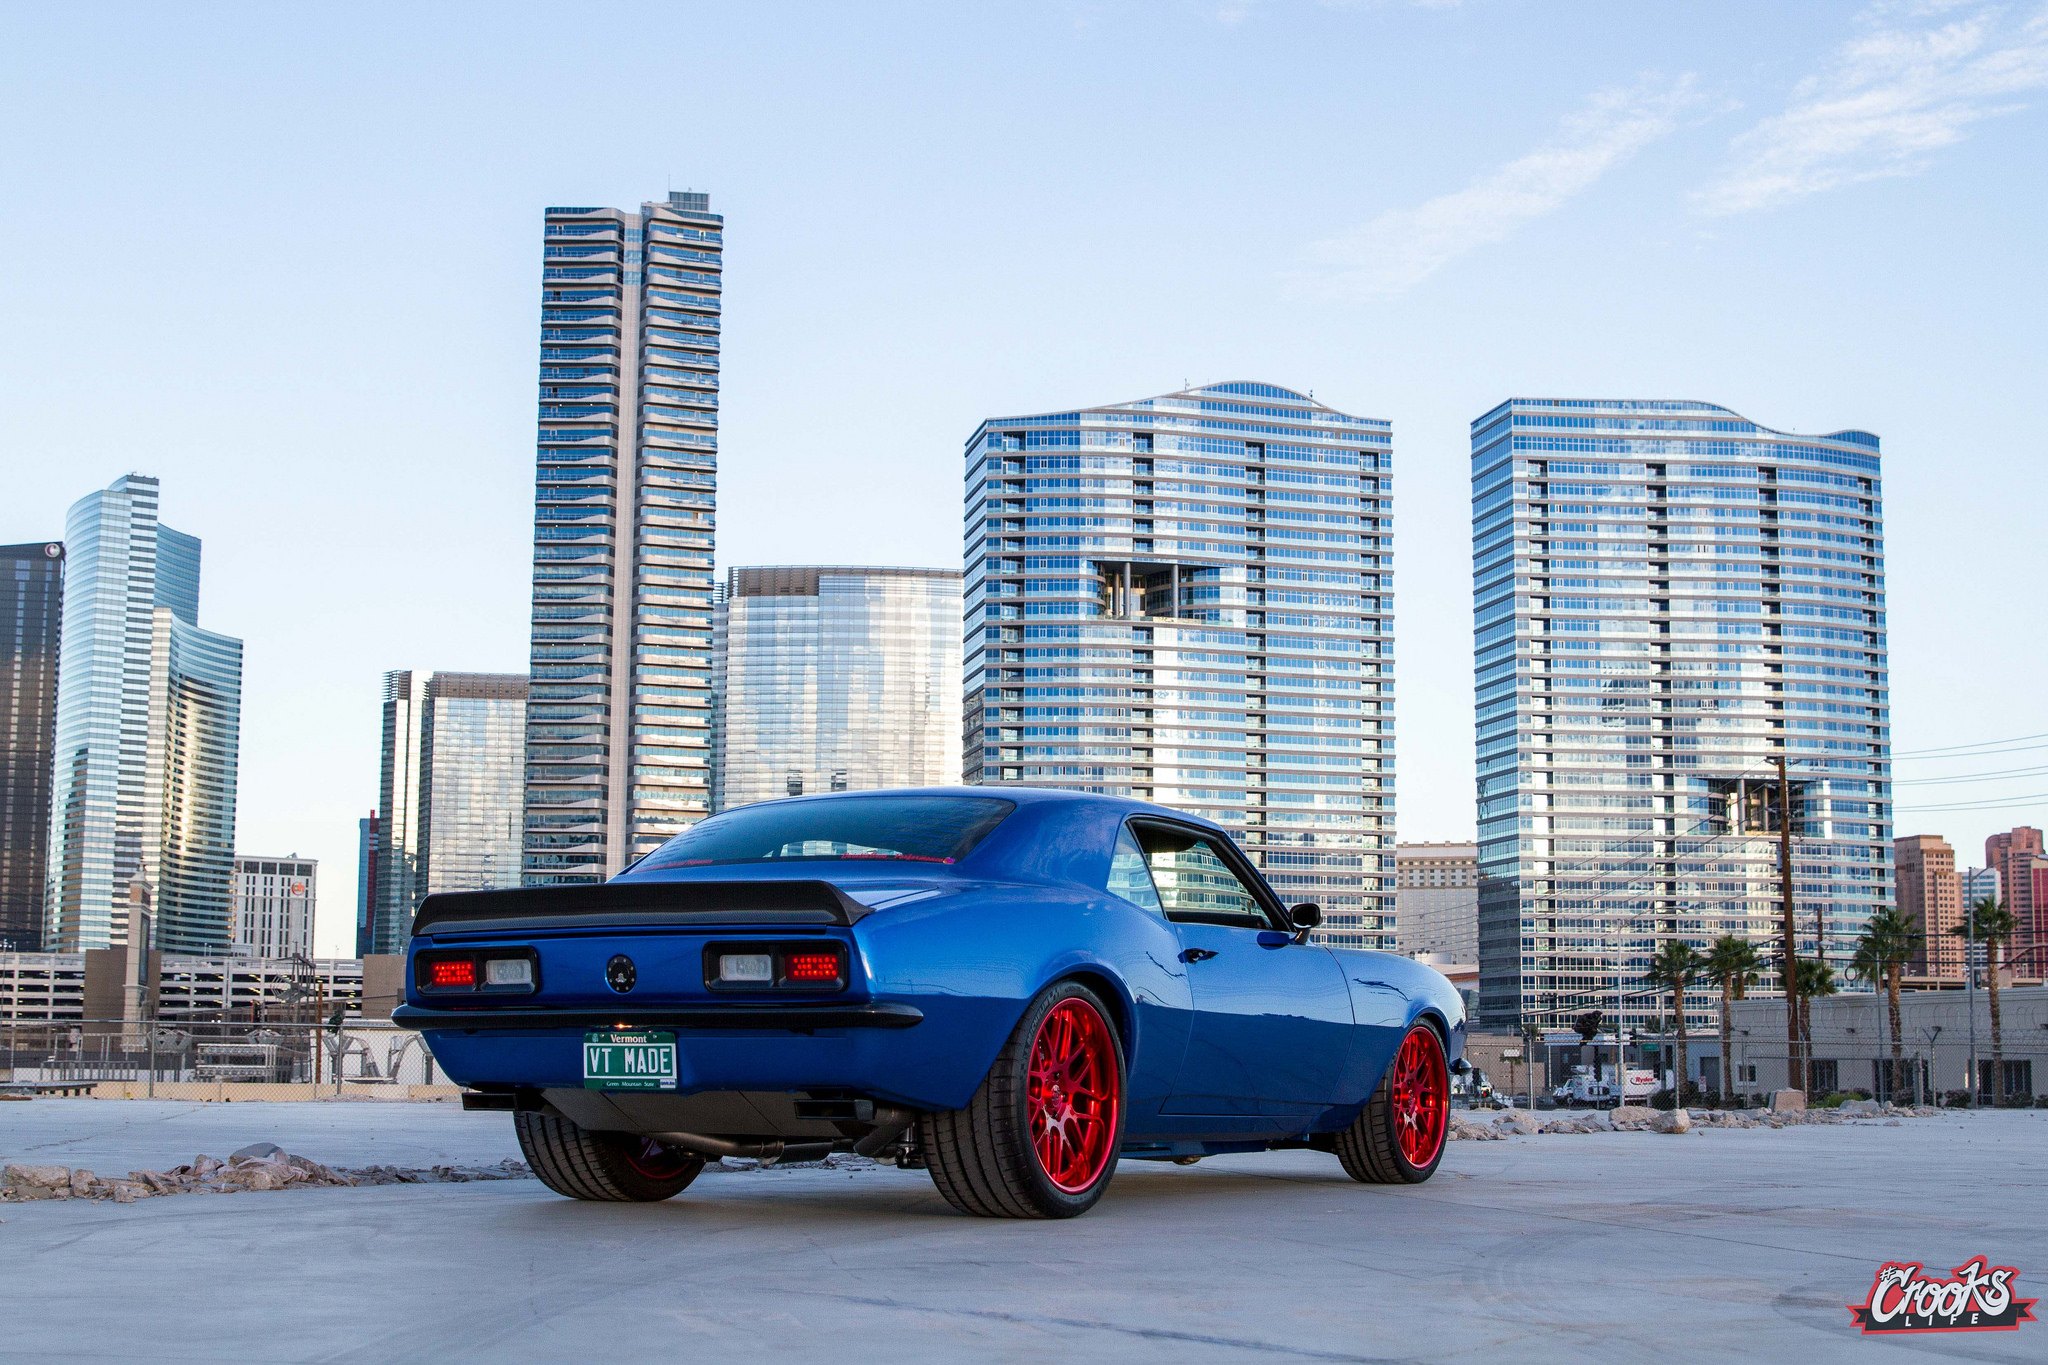 Aftermarket Rear Spoiler on Blue Chevy Camaro - Photo by Jimmy Crook